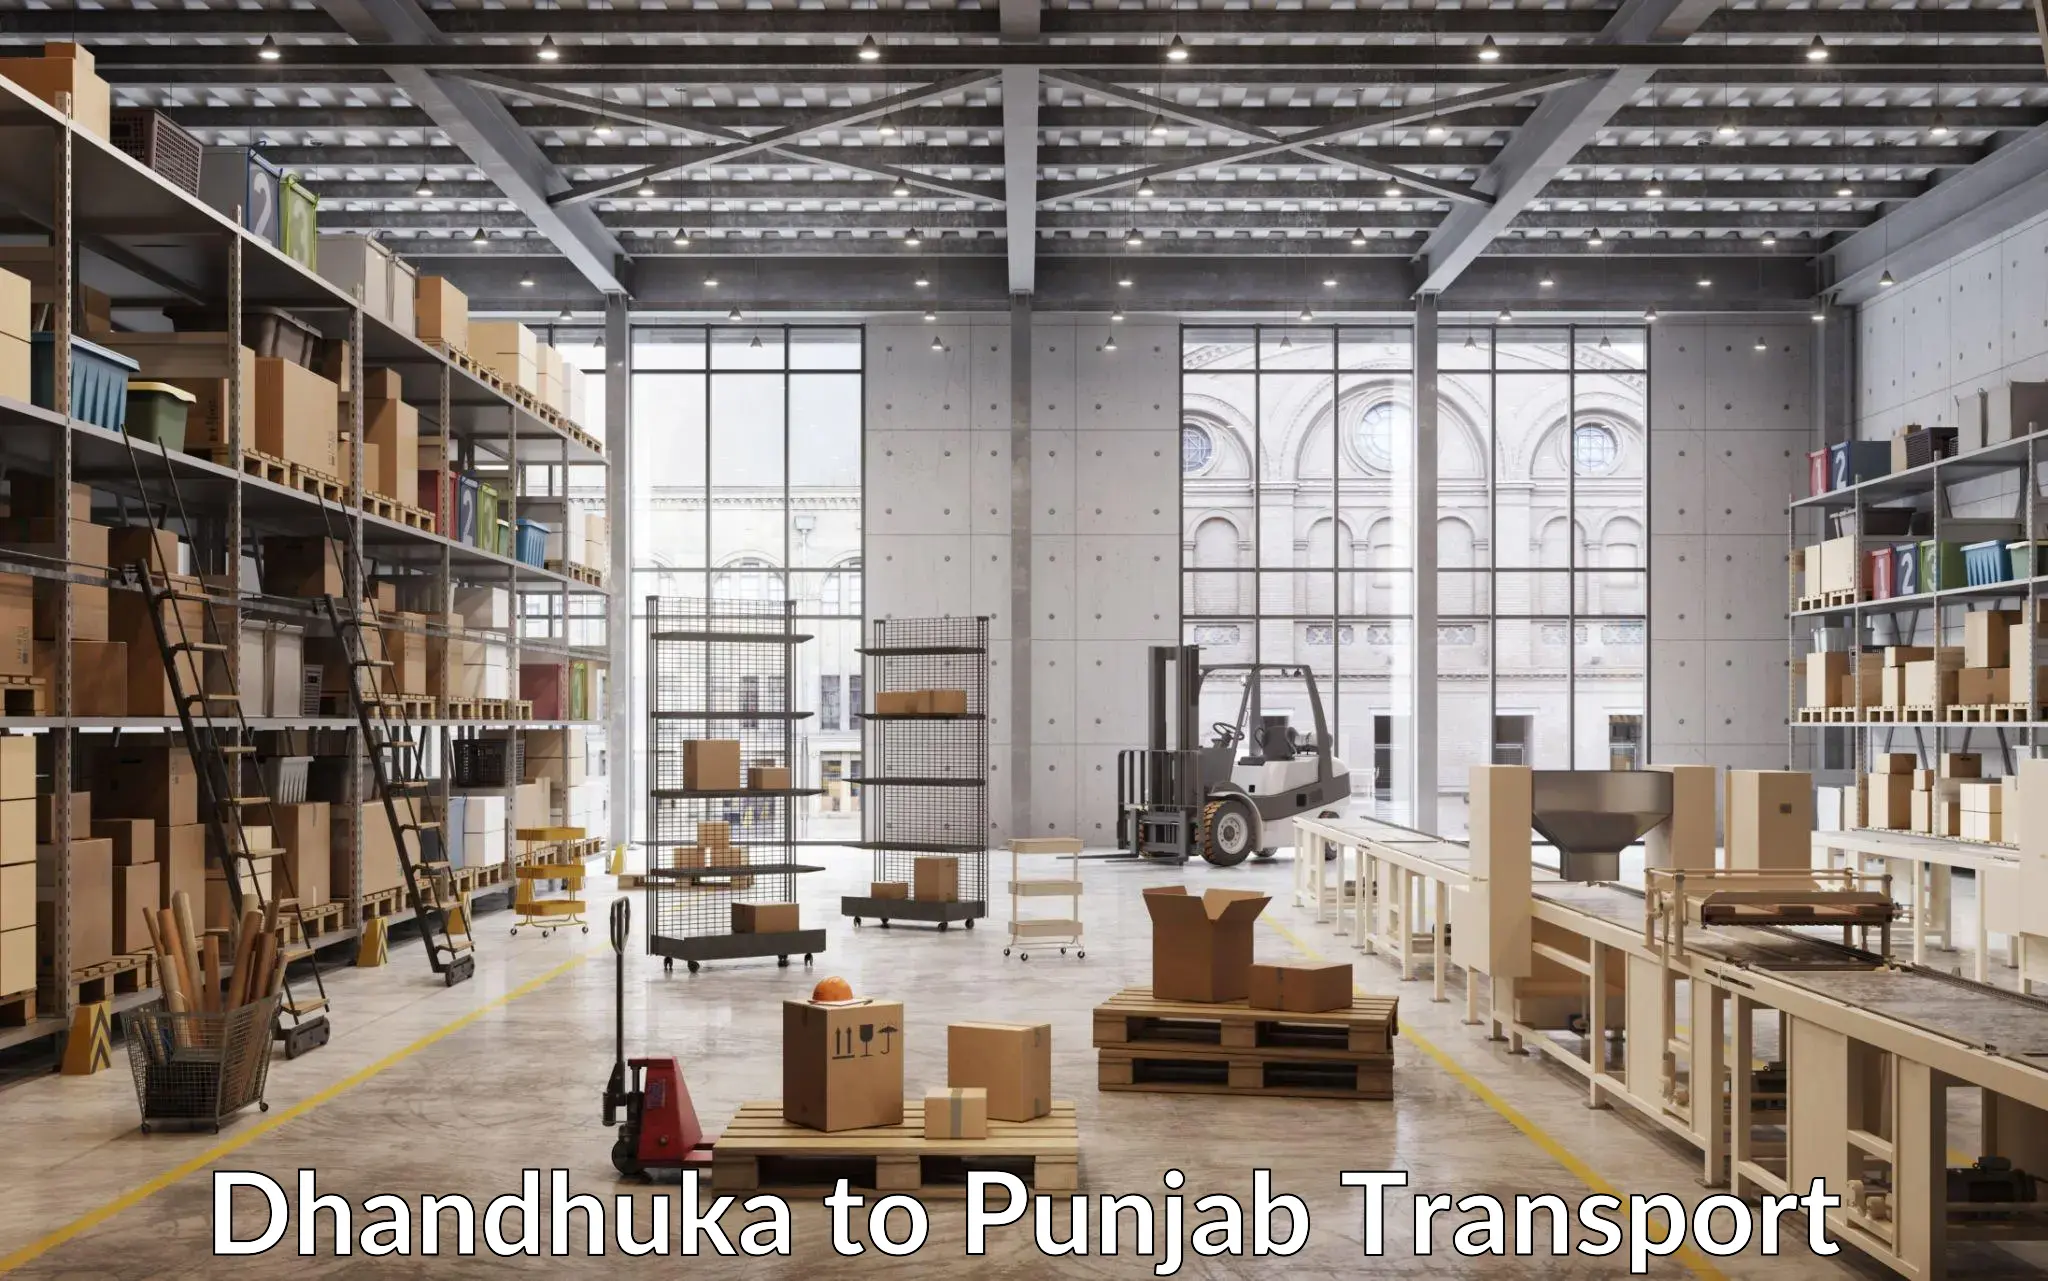 Commercial transport service Dhandhuka to Ludhiana